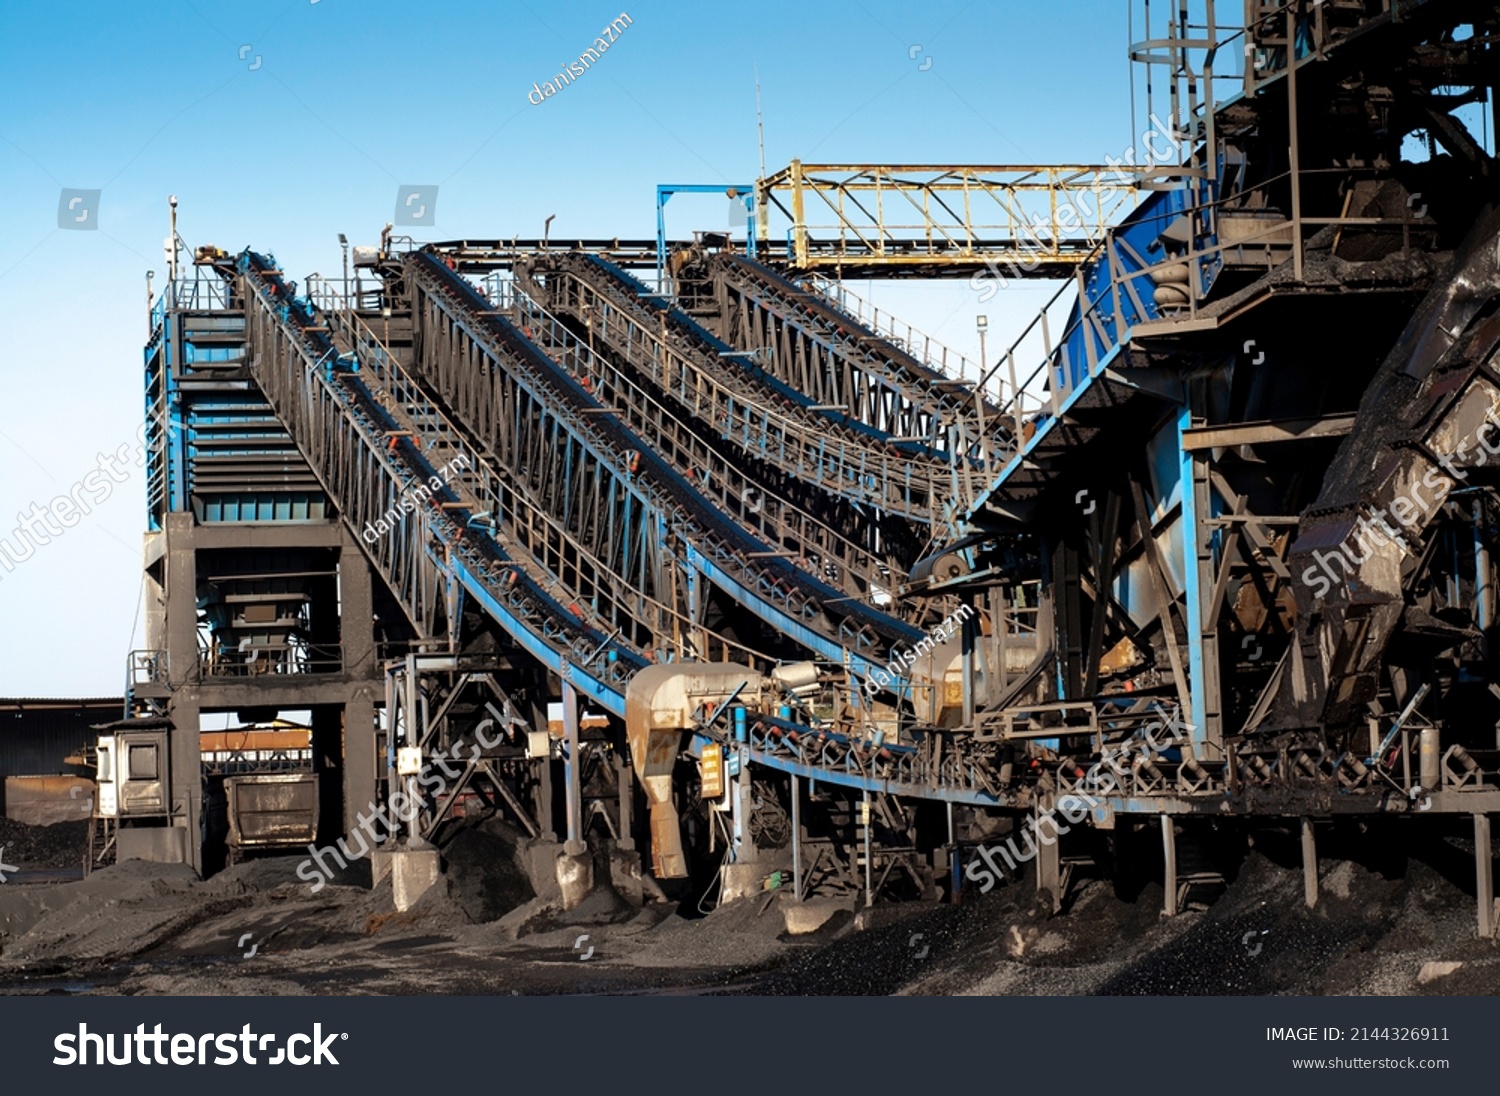 Overview of the large capacity coal beneficiation plant. #2144326911